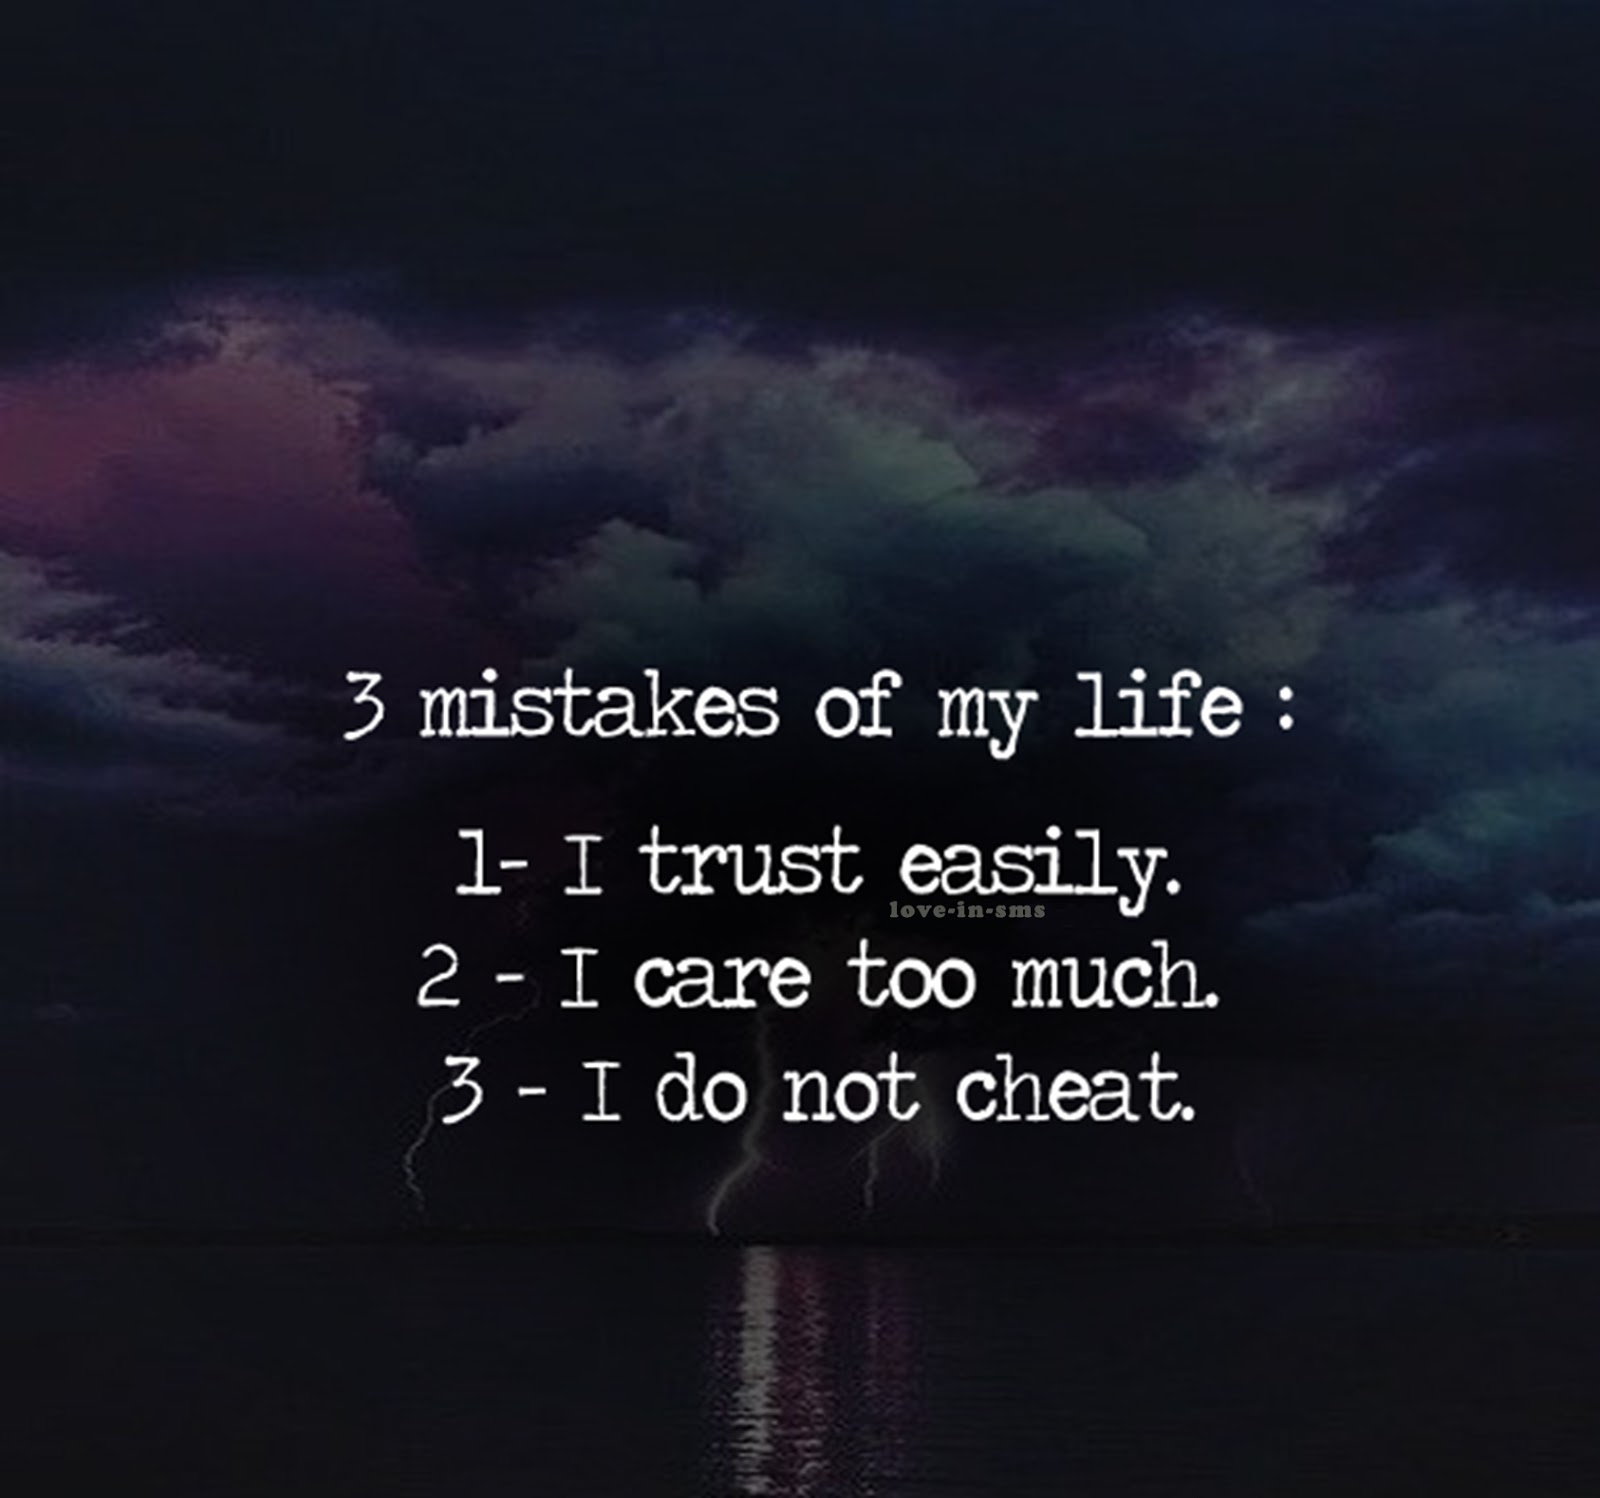 I hope my life. .Mistake of Life. — ВК. 3 Mistakes of my Life. My weakness. The Greatest mistake of my Life.